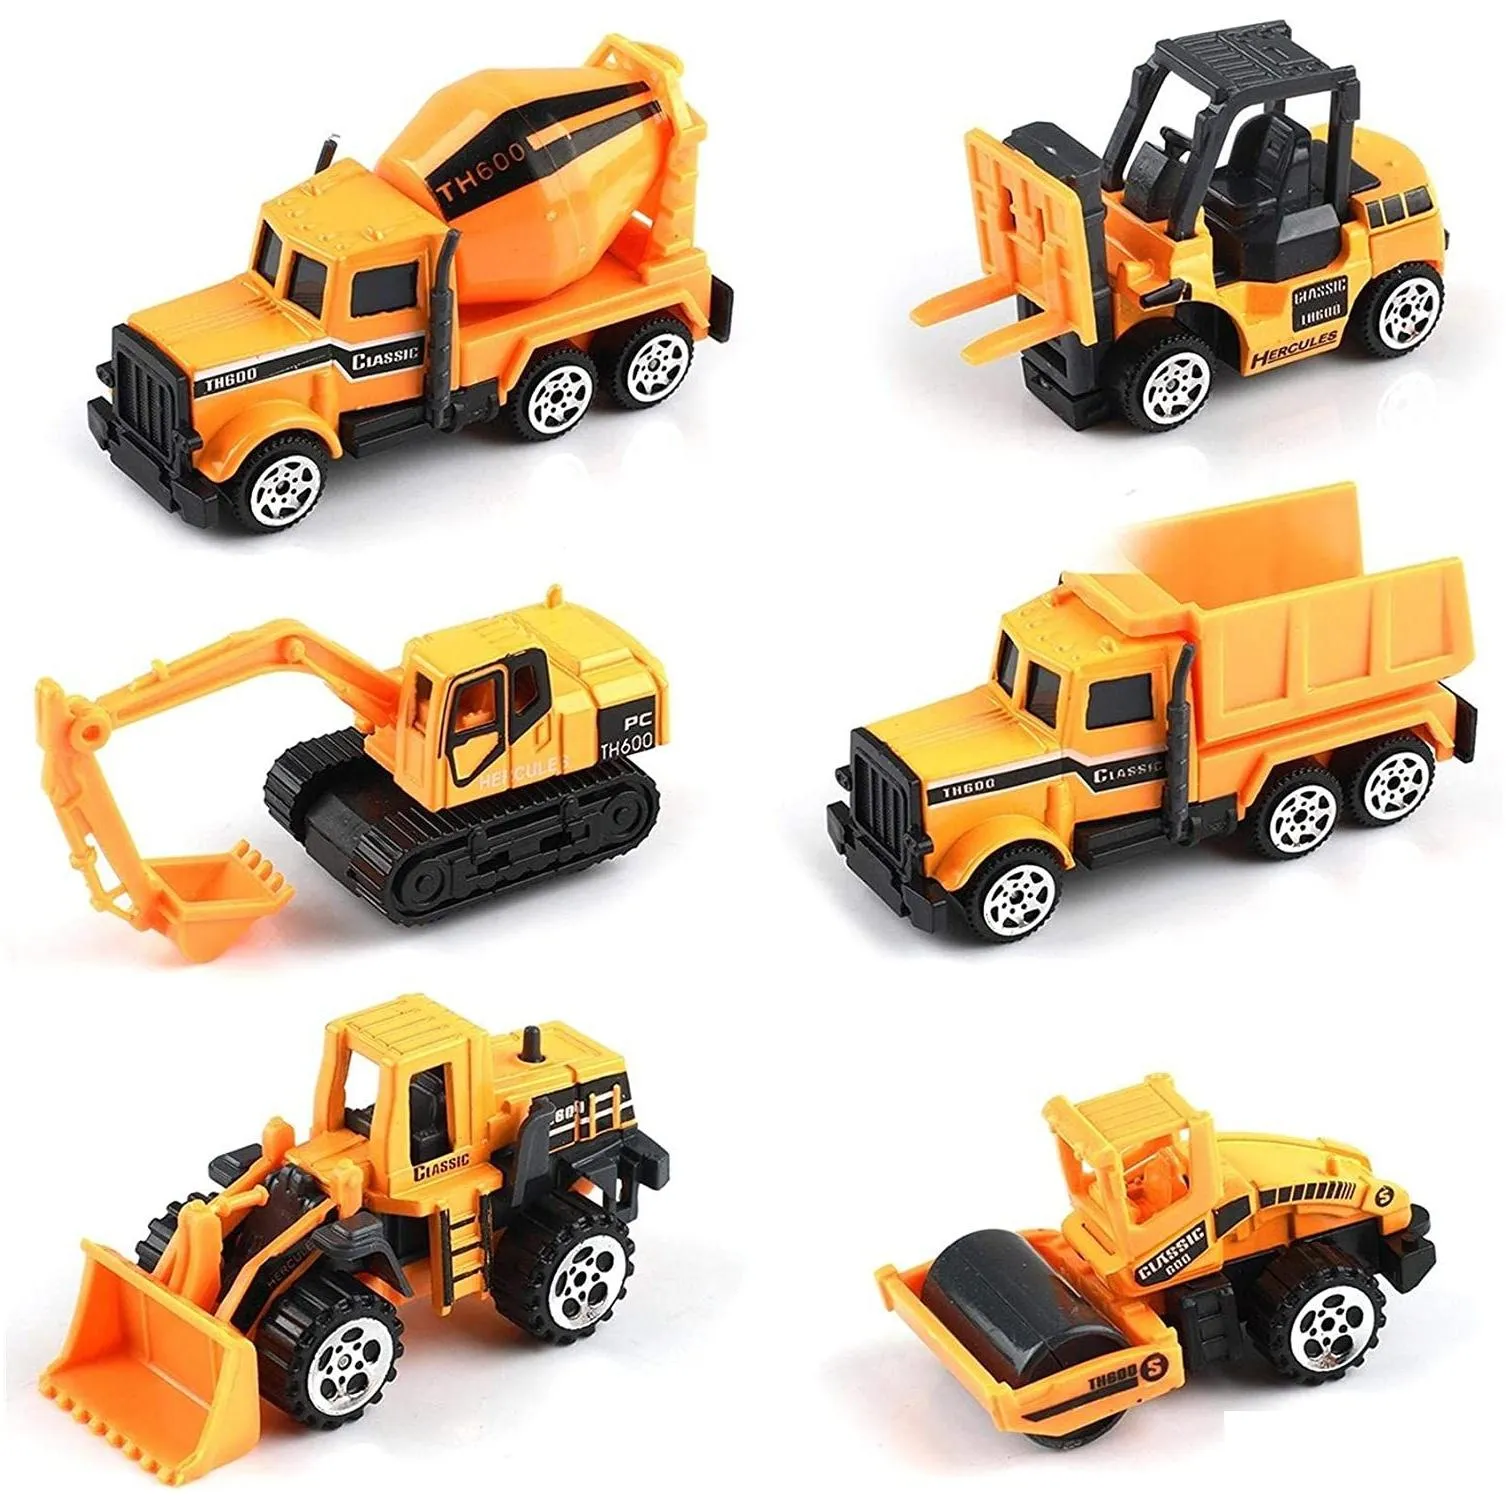 diecast model cars 6piece small construction toys vehicles play trucks vehicle toy toddlers boys kid mini alloy car metal engineering excavator